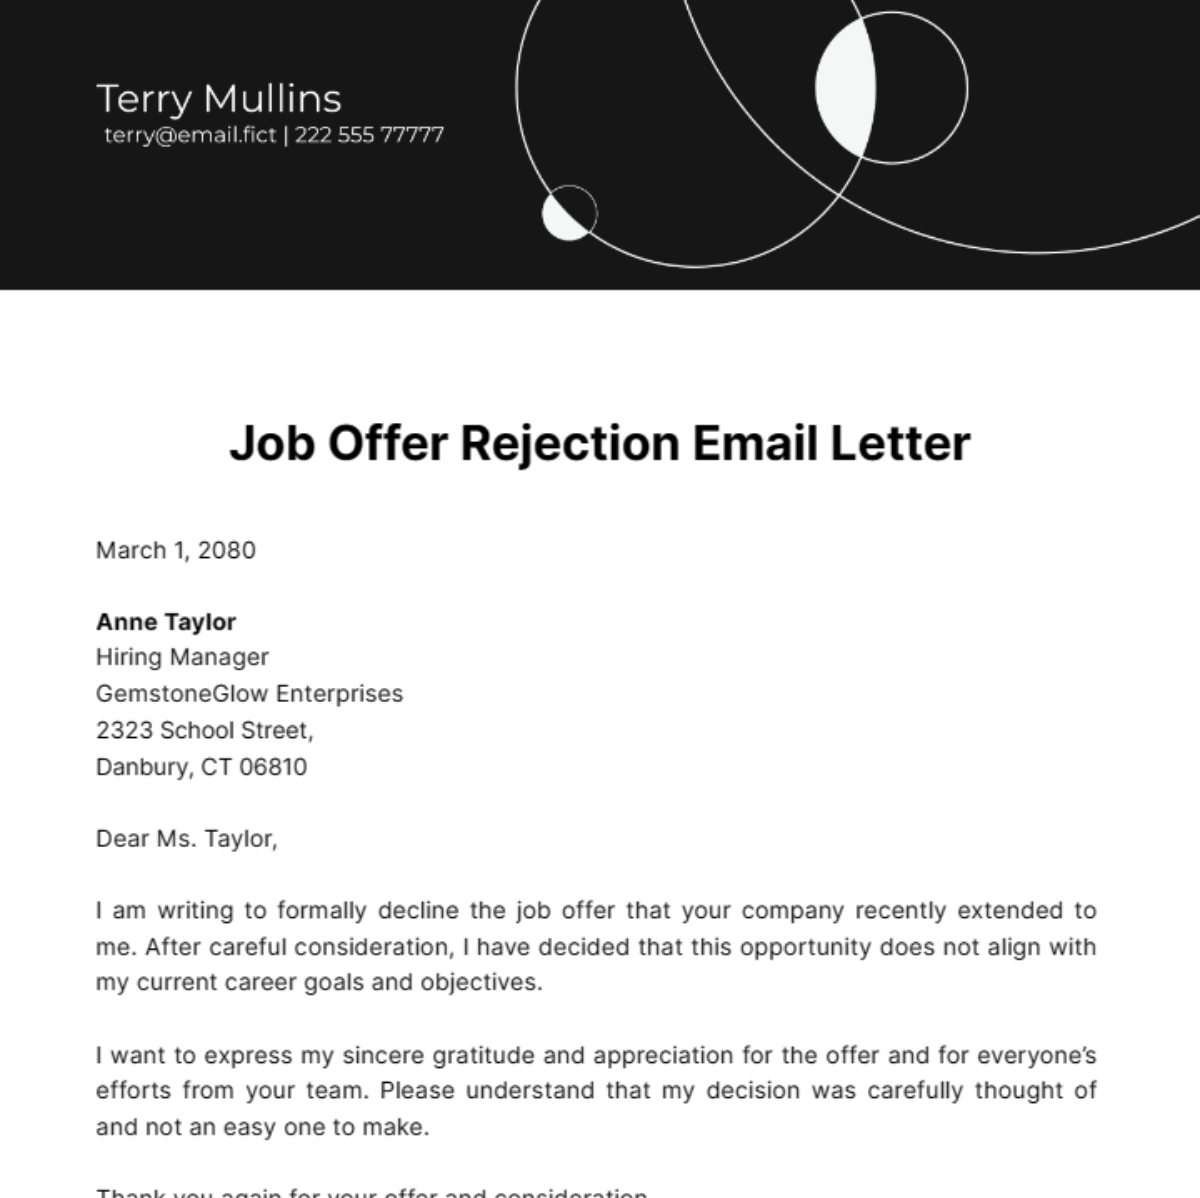 Job Offer Rejection Email Letter Template